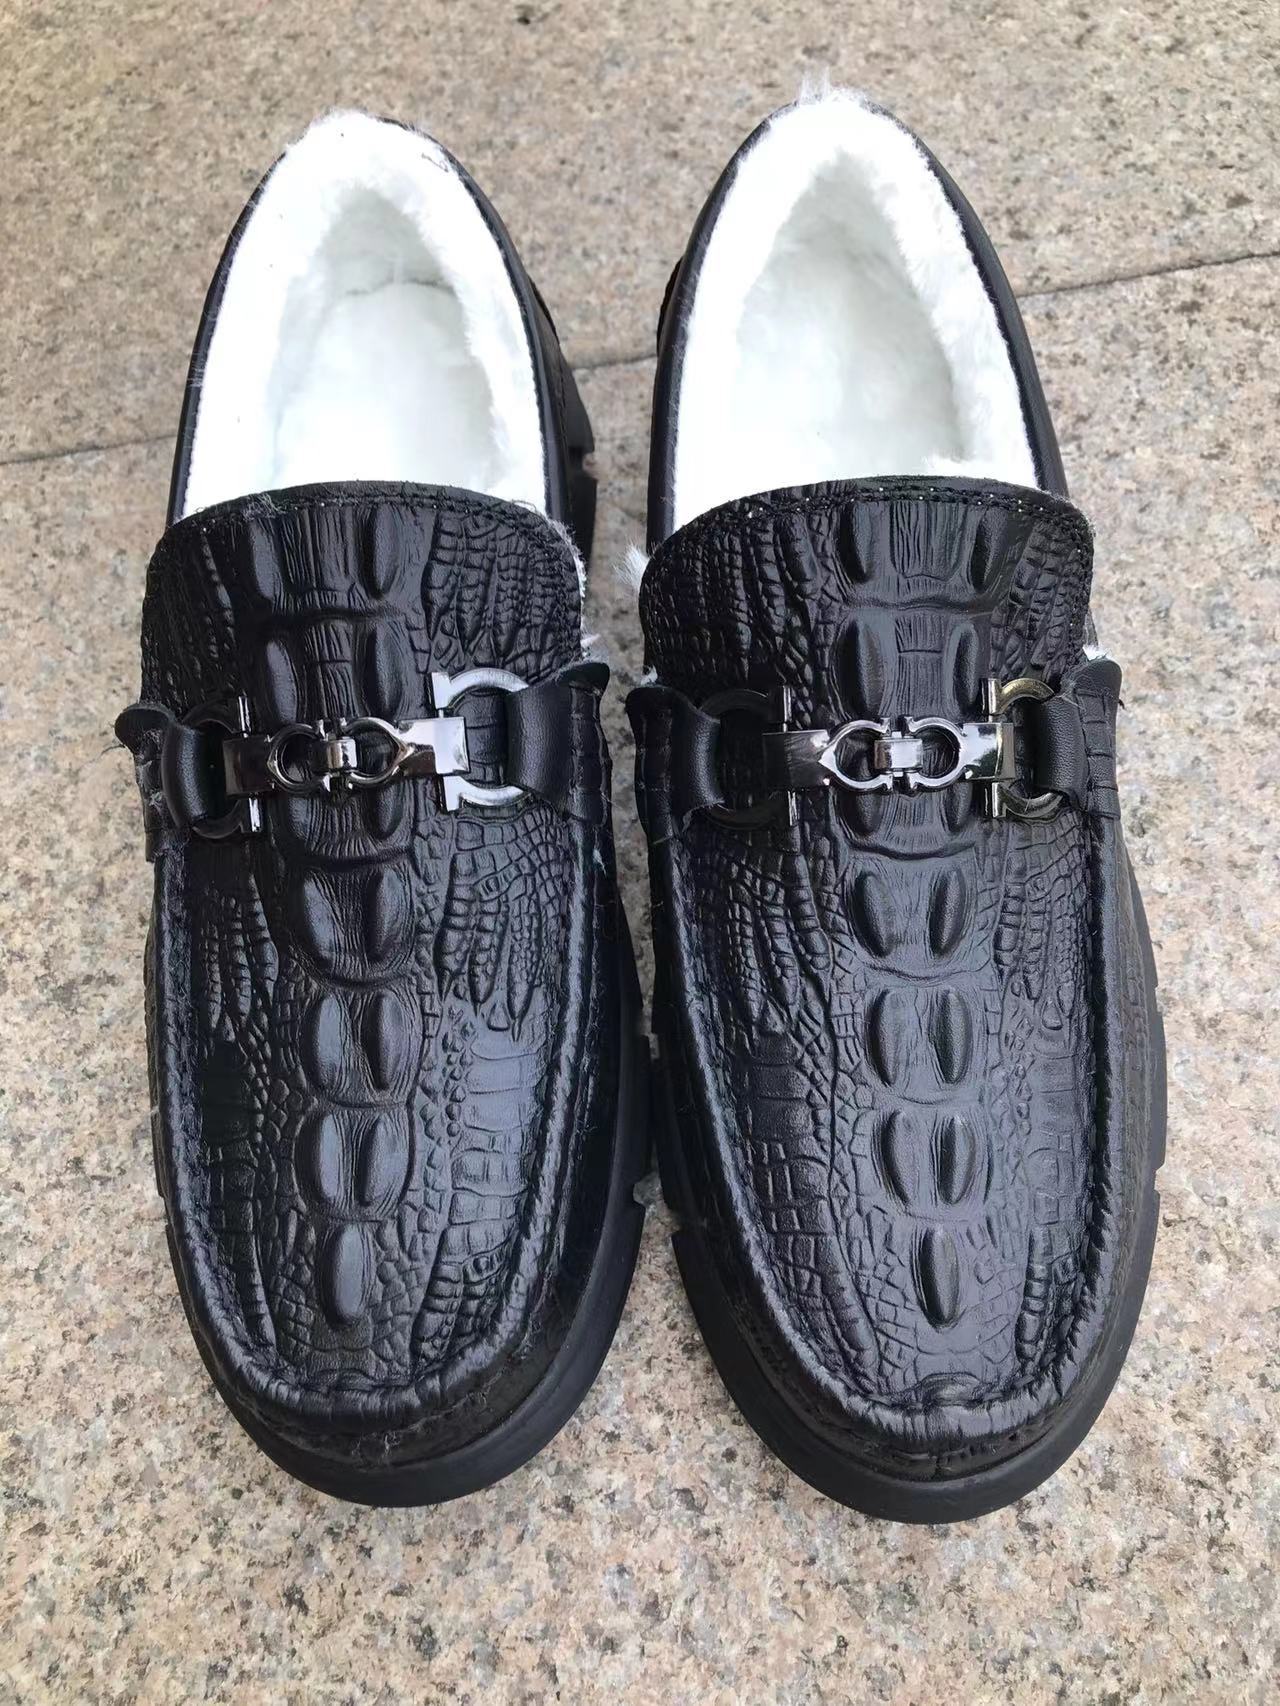 Men's Layer Cowhide Genuine Tods Crocodile Pattern Casual Shoes